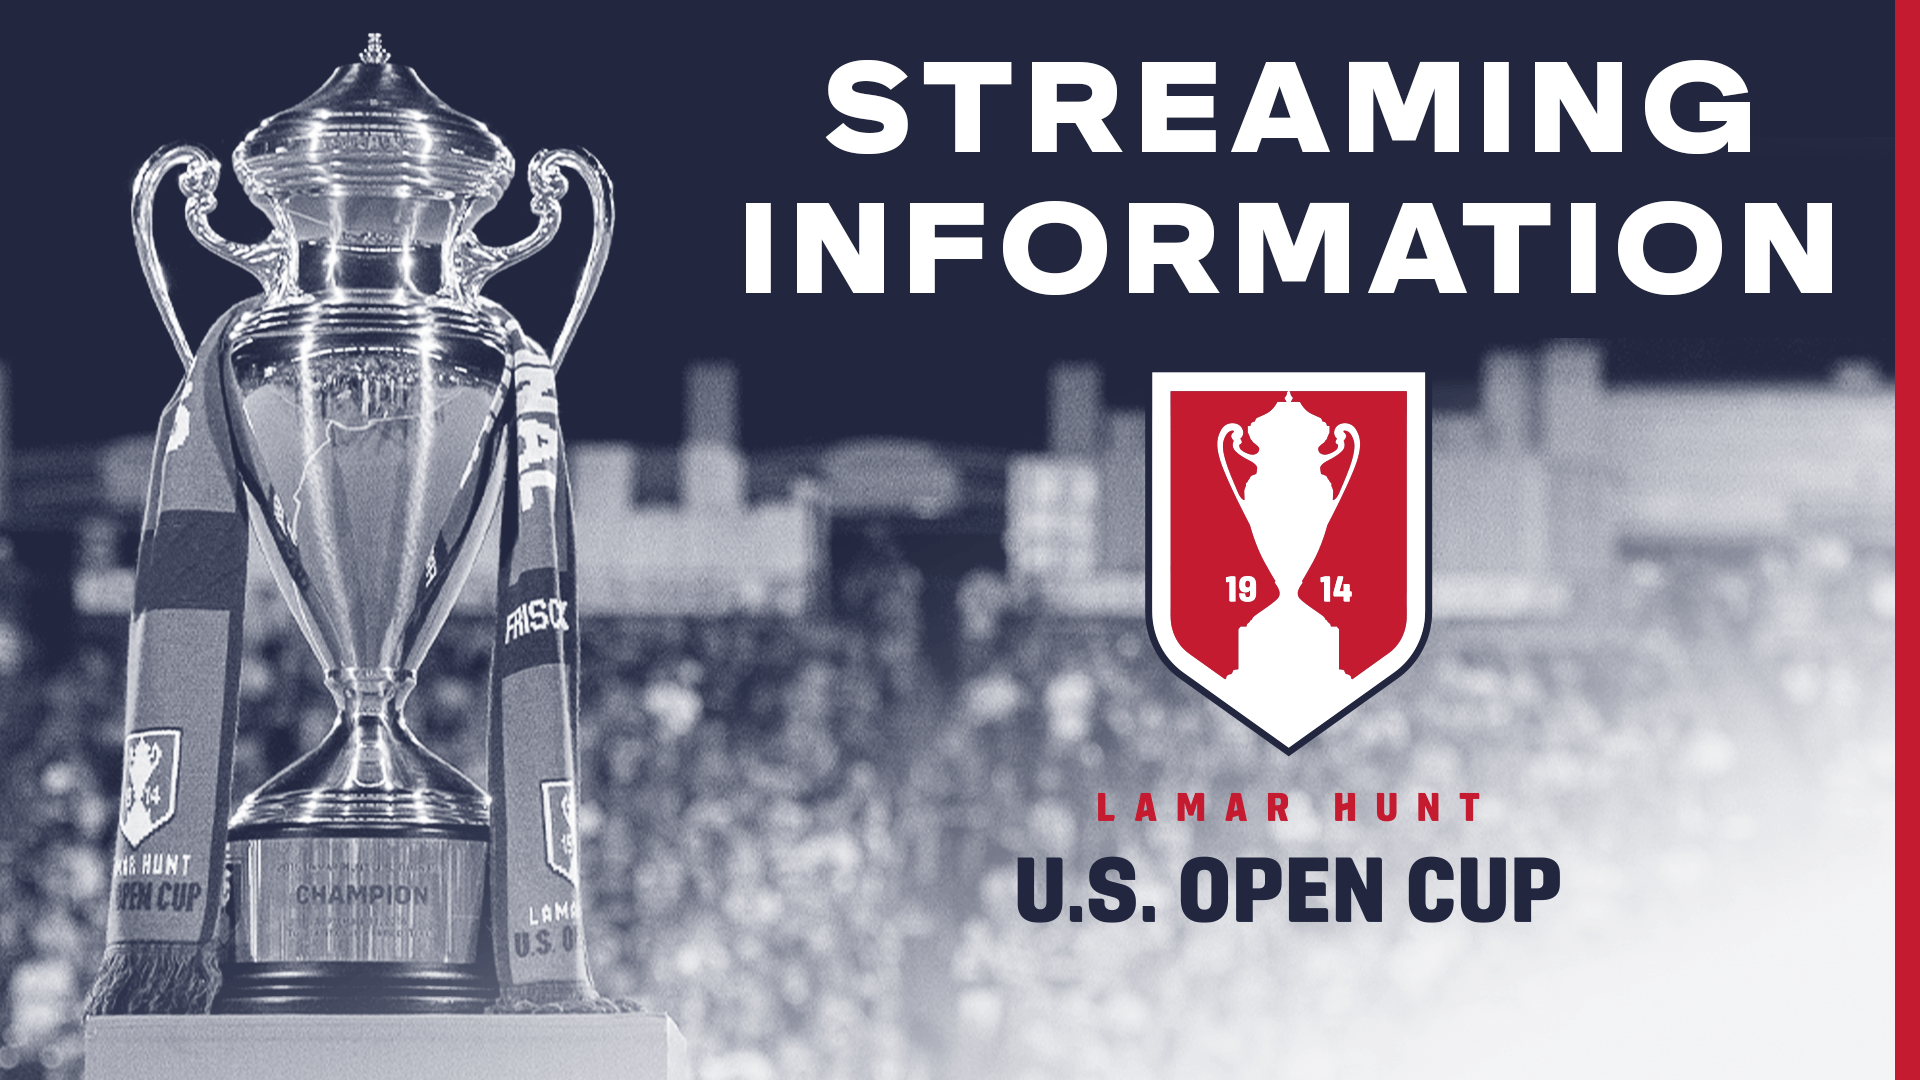 How to watch and stream 2022 U.S. Open Cup